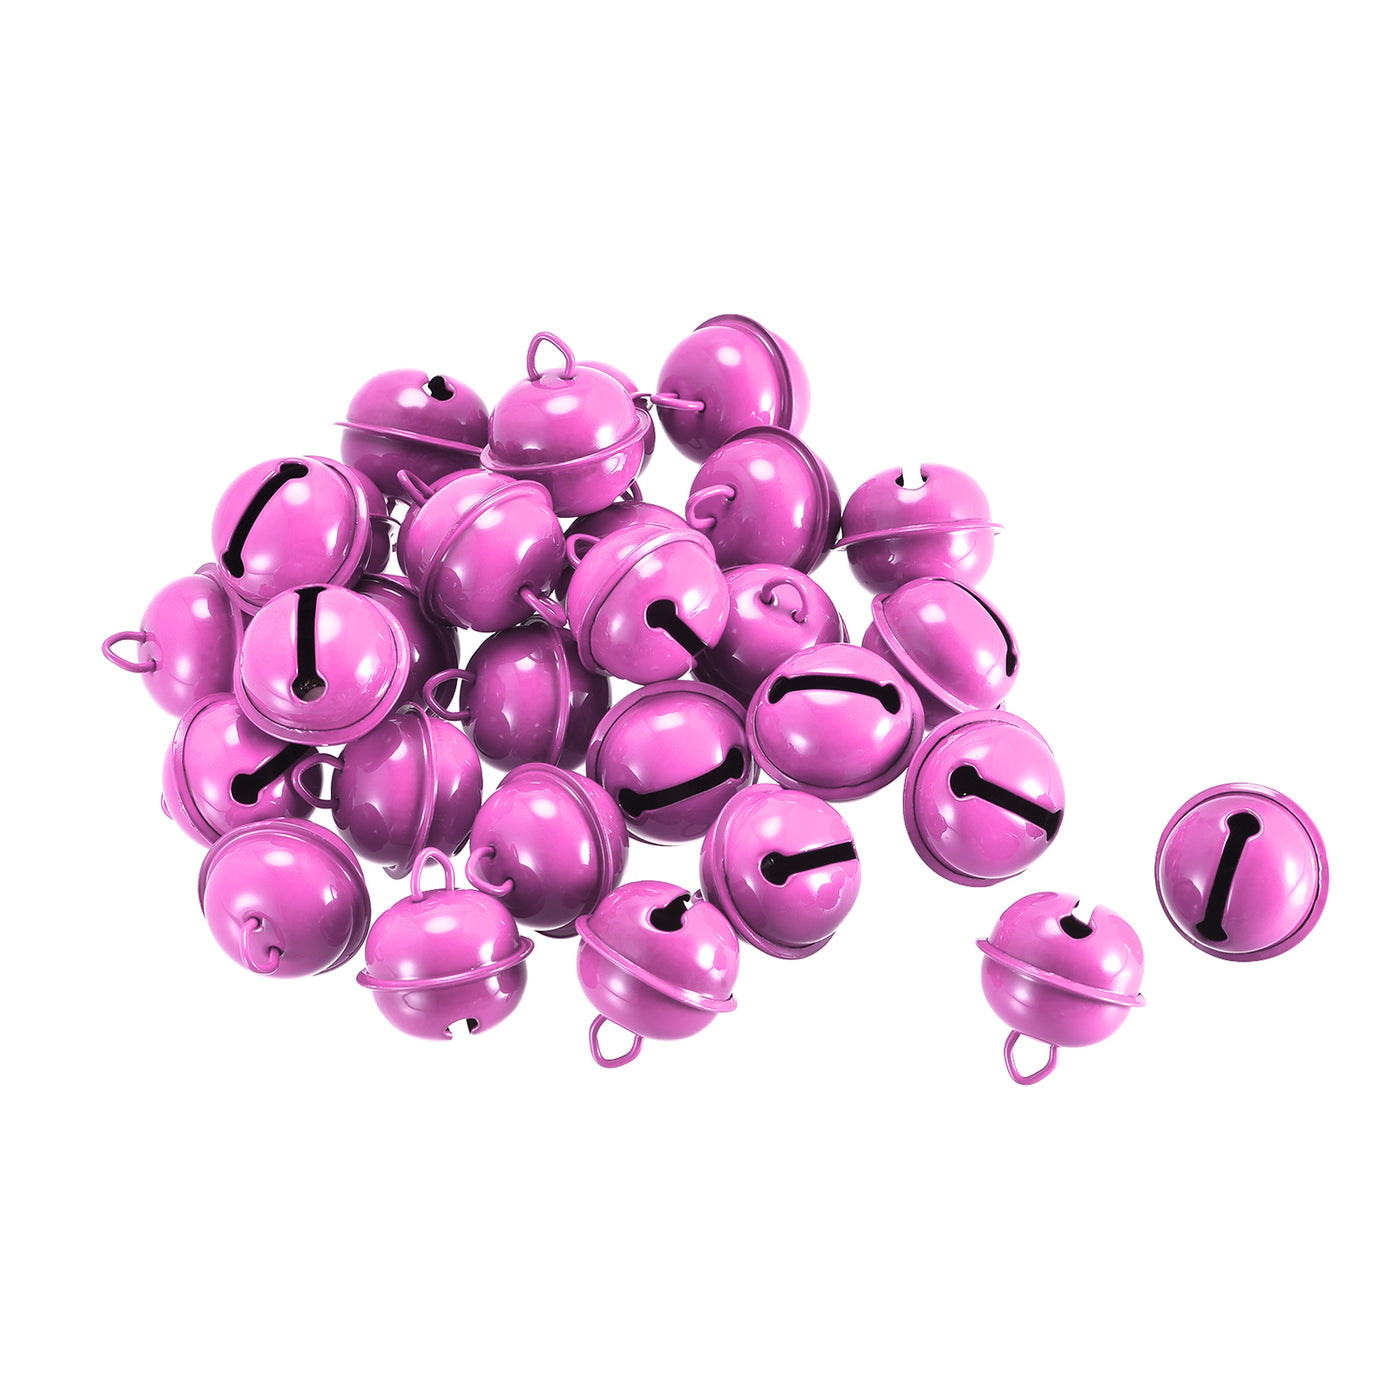 Uxcell Uxcell Jingle Bells, 22mm 48pcs Craft Bells for DIY Holiday Decoration Light Pink